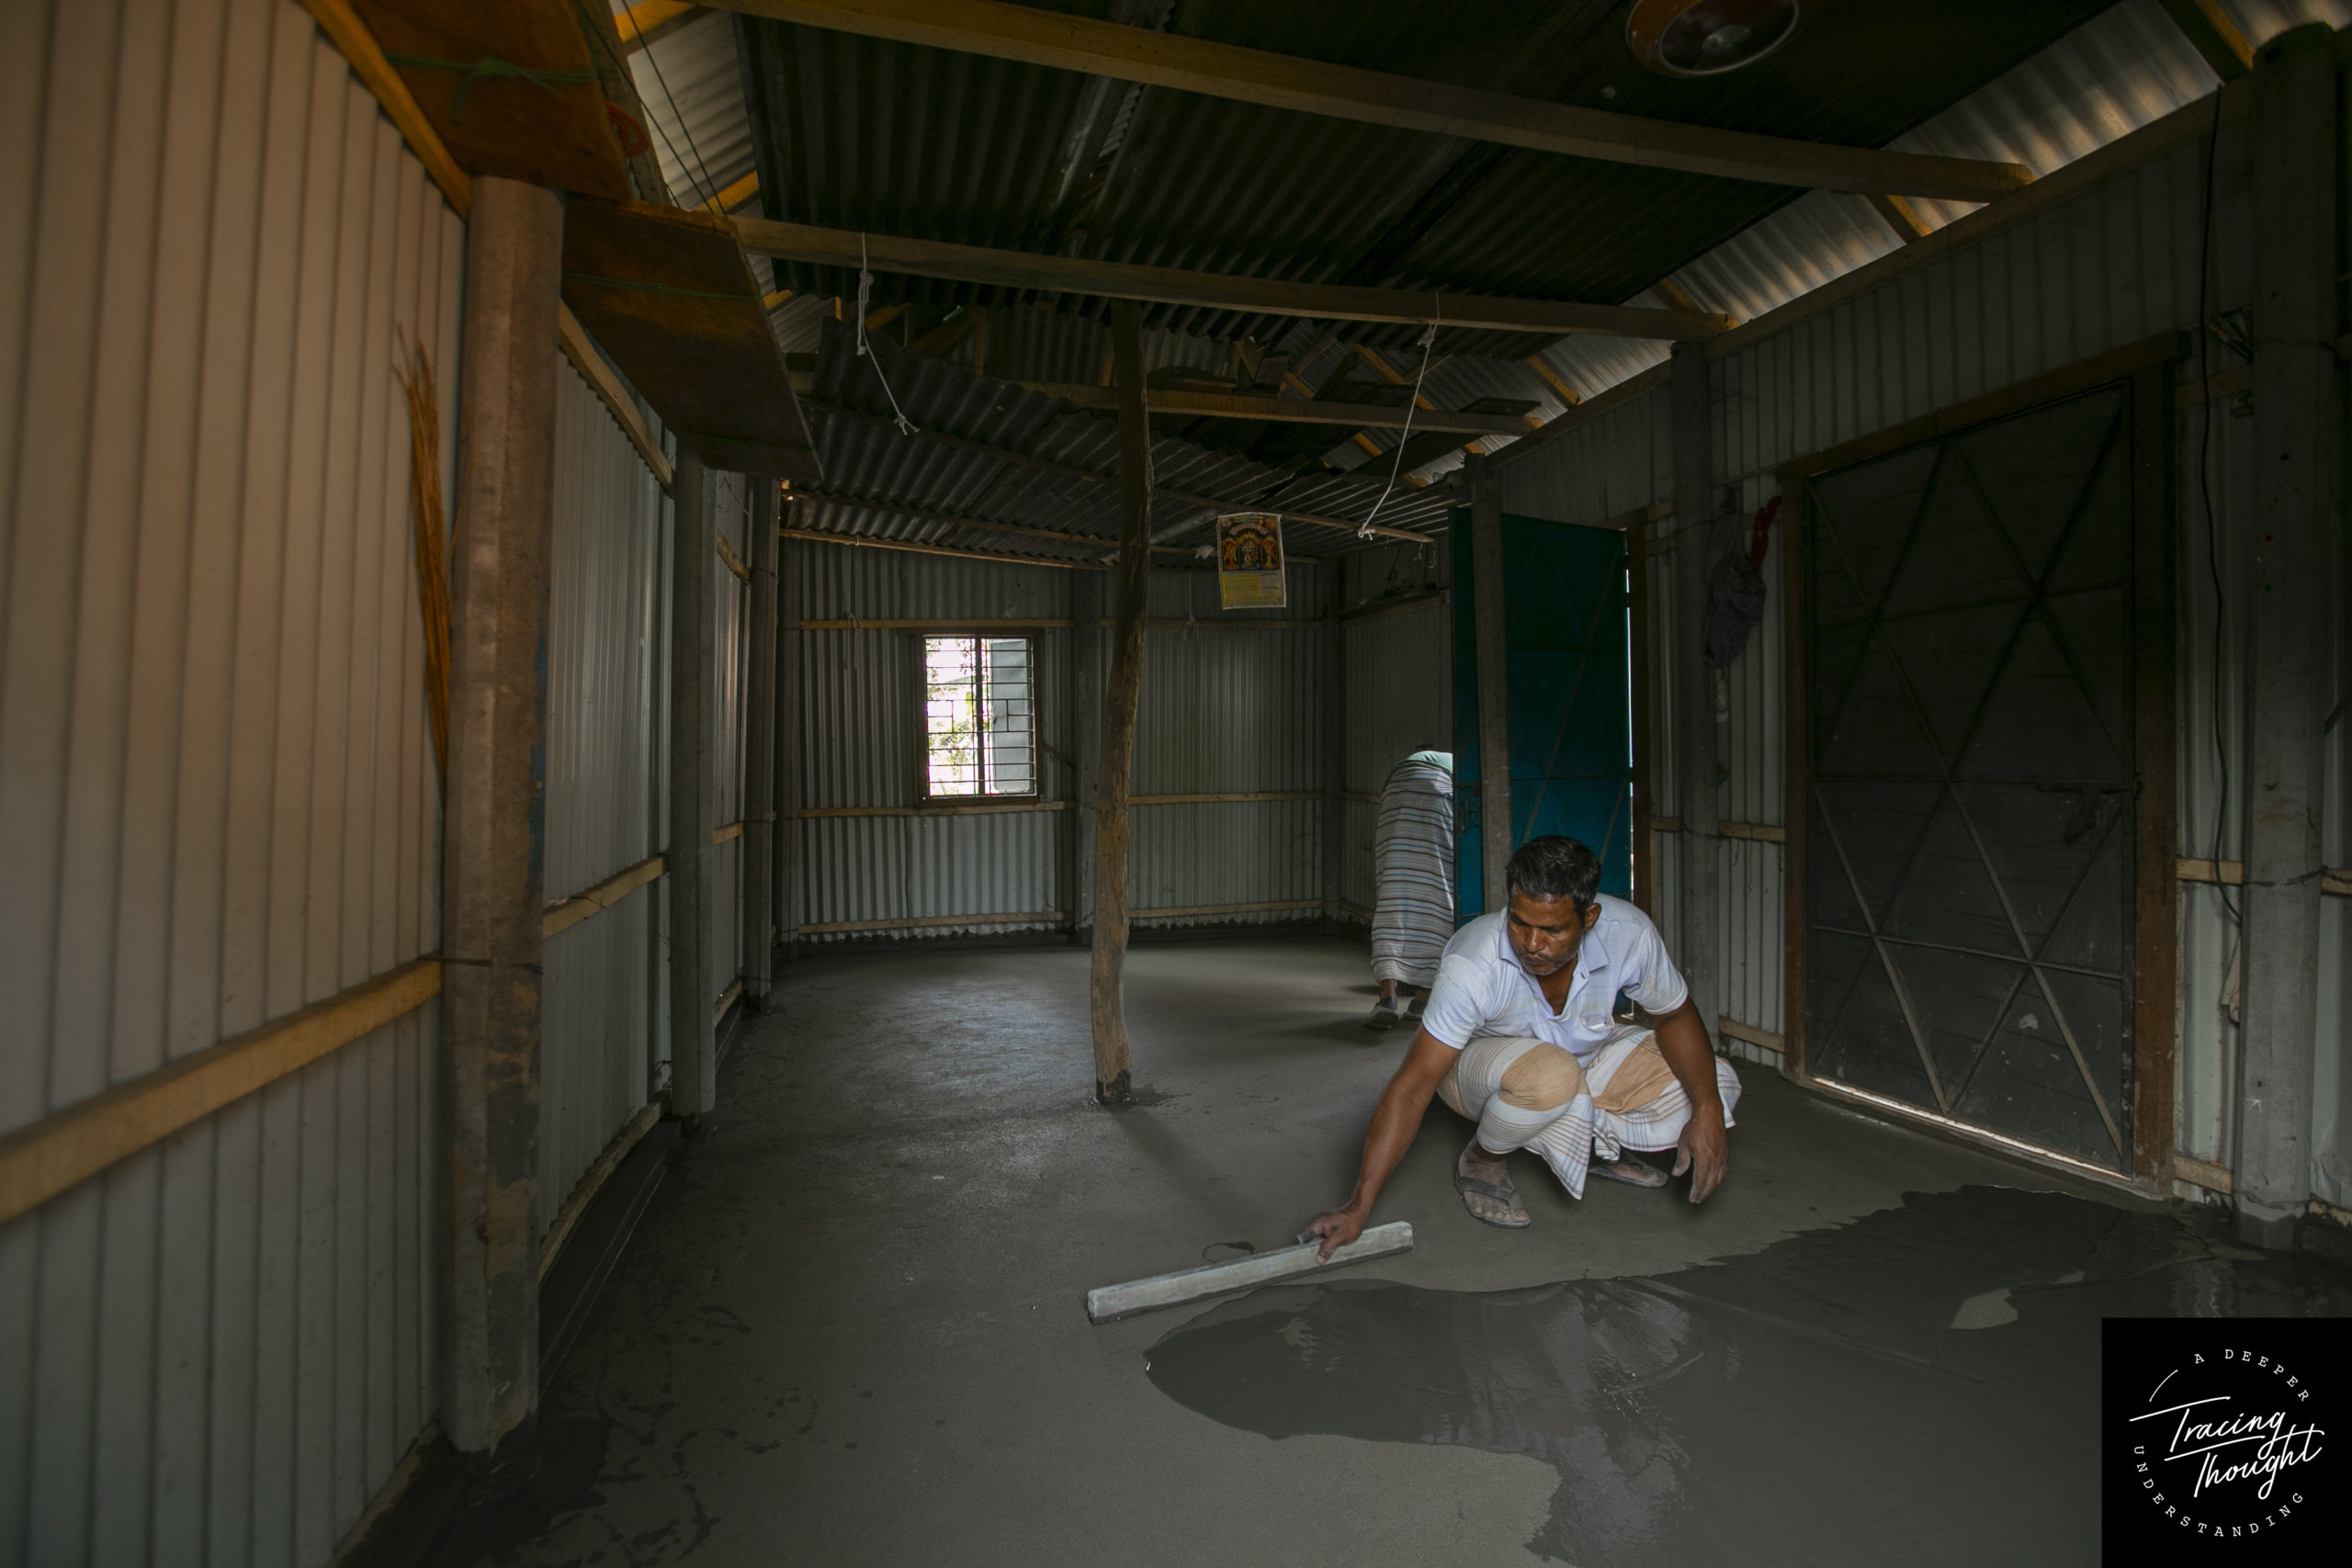 Mud to Mortar replaces compact mud floors with durable concrete slabs that are low-tech and cost-effective.